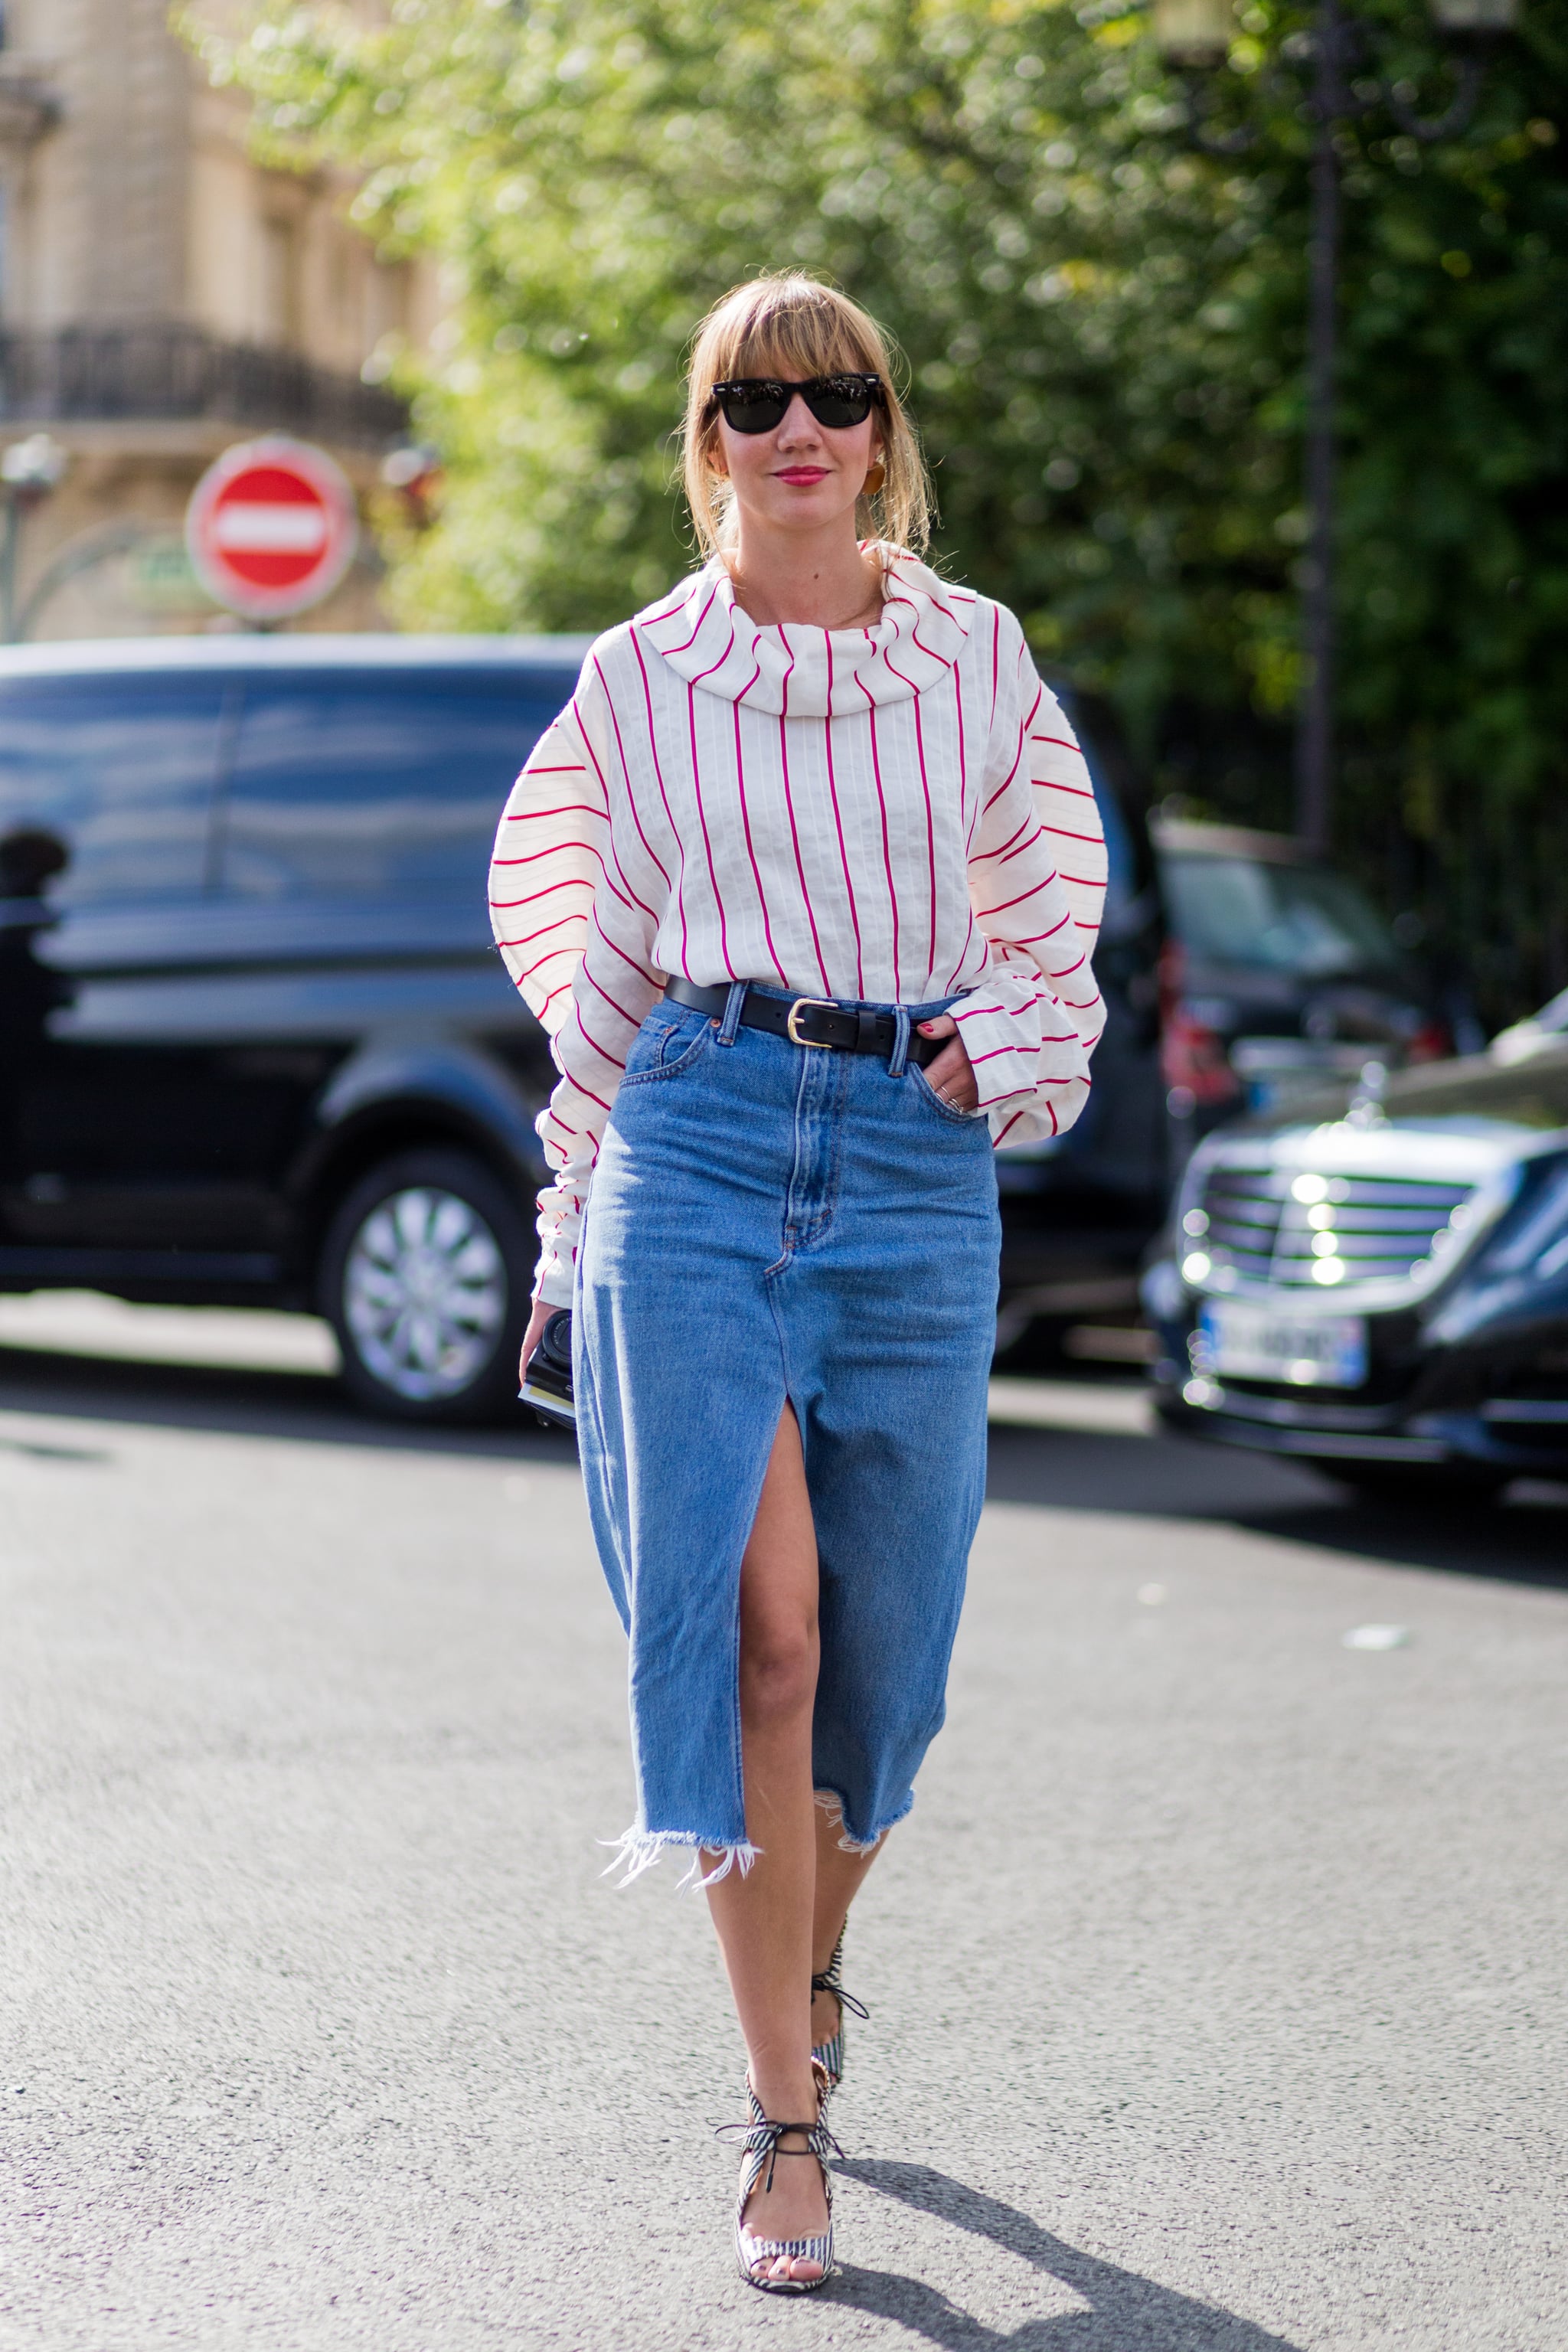 tops to wear with denim skirts